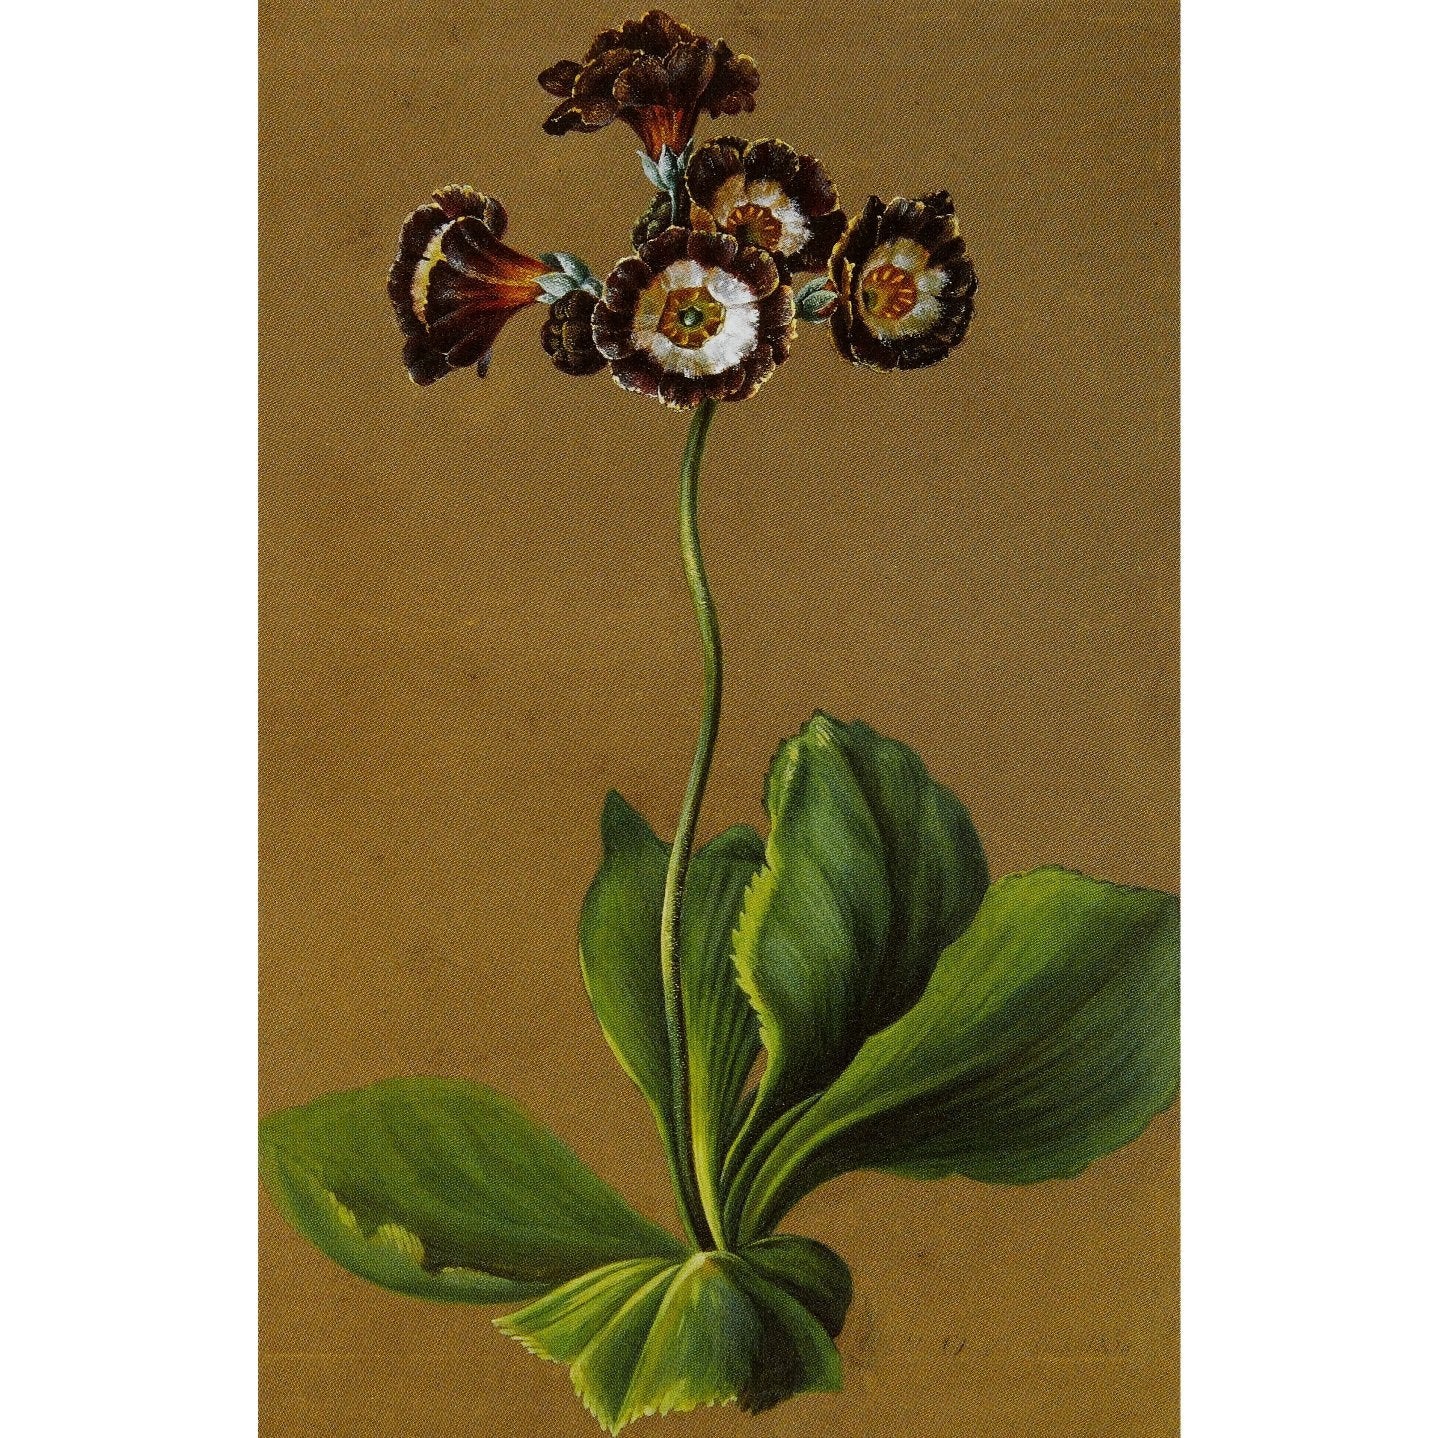 Notecard - Hybrid auricula by Louise d'Orleans. From the Broughton Collection of the Fitzwilliam Museum, brought to you by CuratingCambridge.